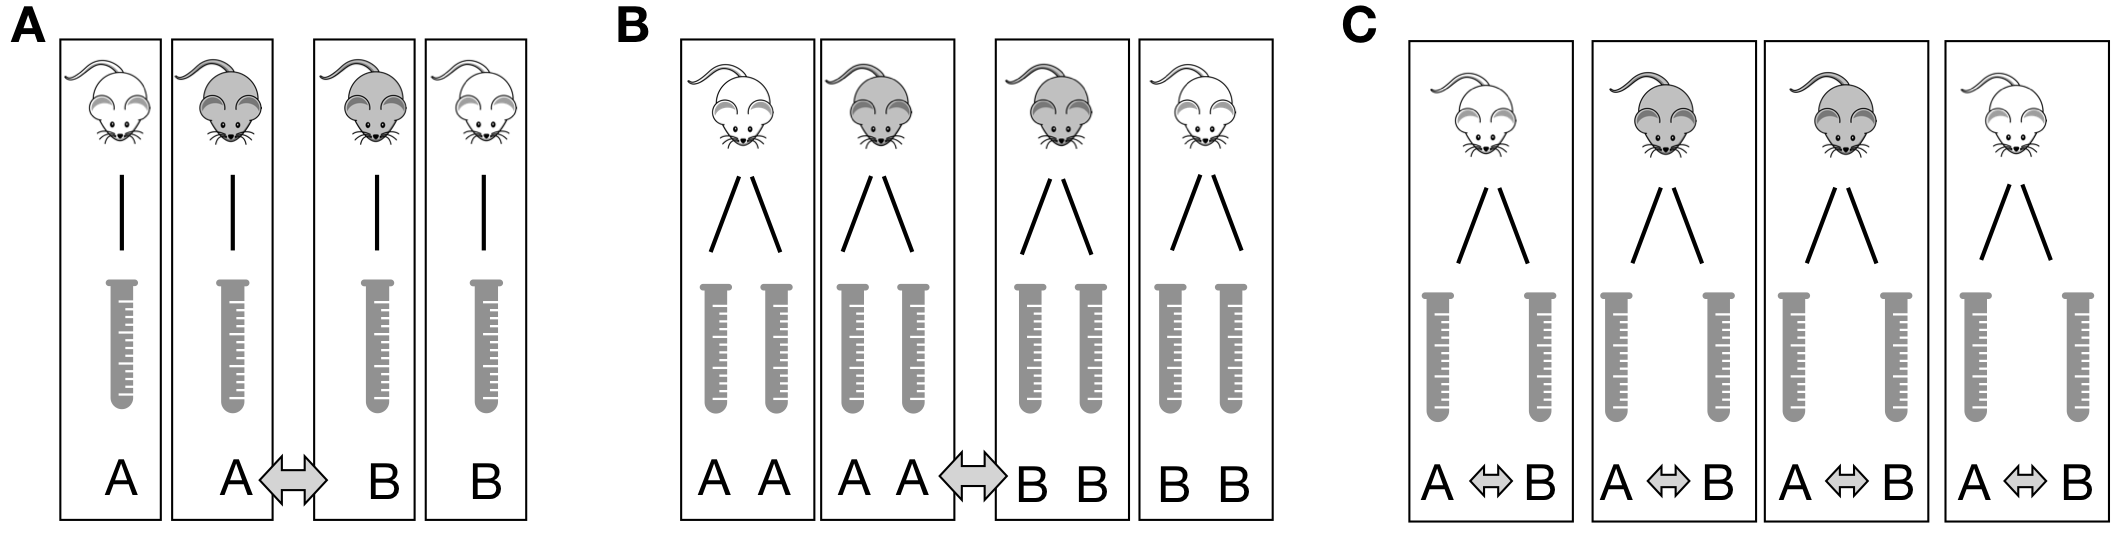 Three designs to determine the difference between two preparation kits A and B based on four mice. A: One sample per mouse. Comparison between averages of samples with same kit. B: Two samples per mouse treated with the same kit. Comparison between averages of mice with same kit requires averaging responses for each mouse first. C: Two samples per mouse each treated with different kit. Comparison between two samples of each mouse, with differences averaged.